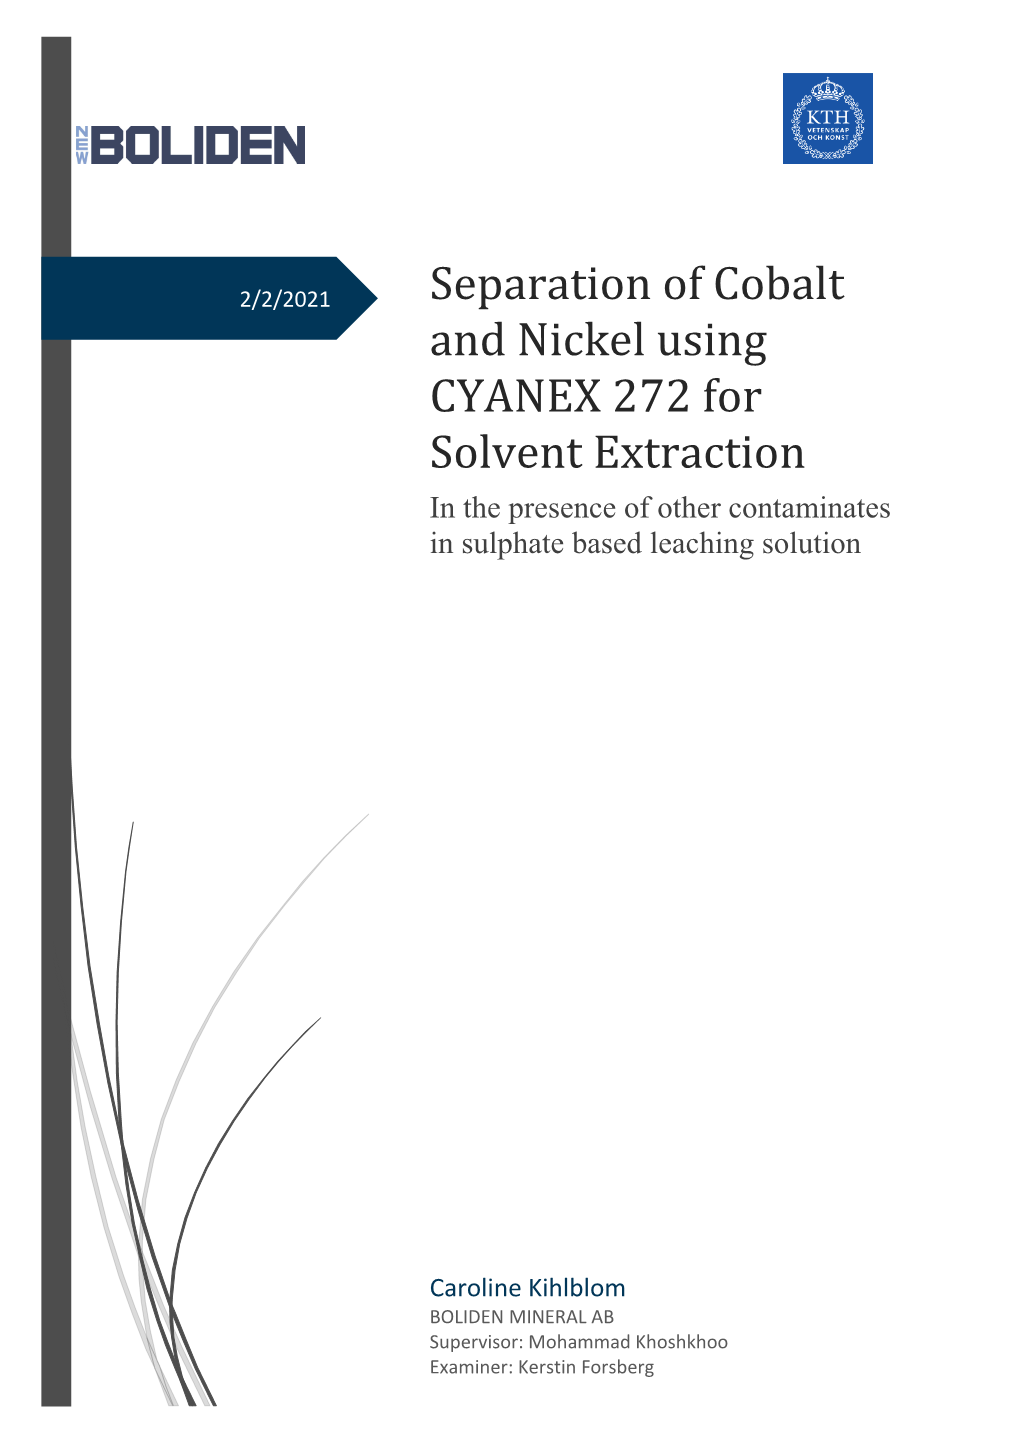 Separation of Cobalt and Nickel Using CYANEX 272 for Solvent Extraction